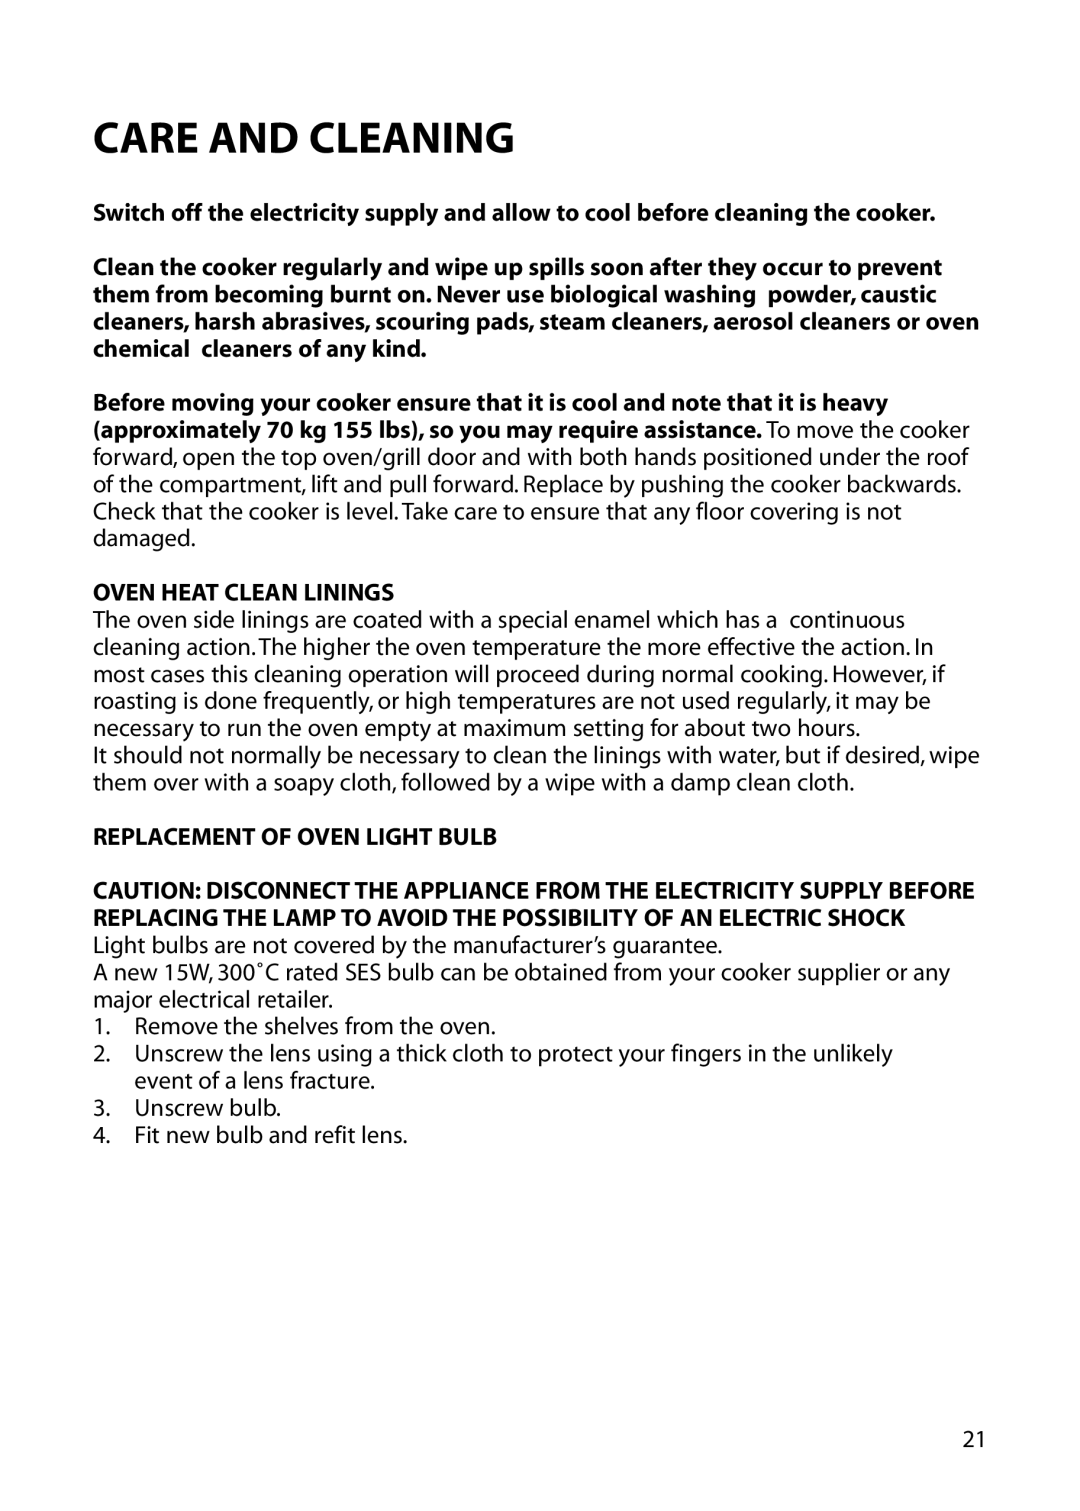 Hotpoint EG72, EG53 installation instructions Care And Cleaning, Oven Heat Clean Linings, Replacement Of Oven Light Bulb 